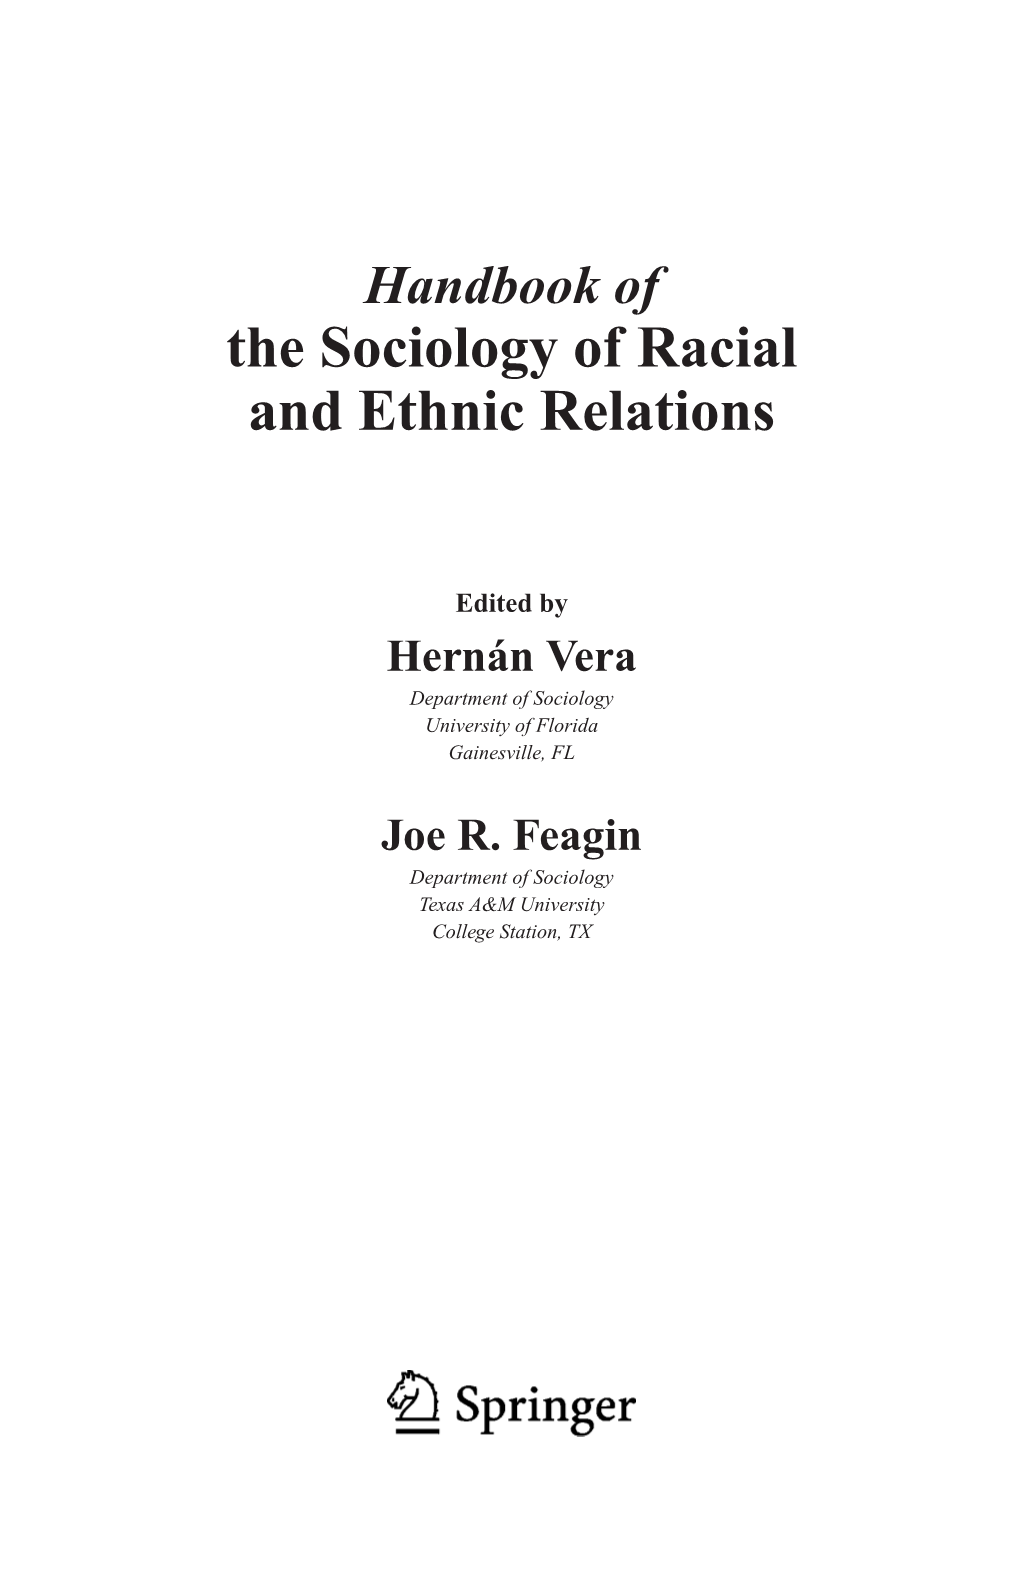 The Sociology of Racial and Ethnic Relations